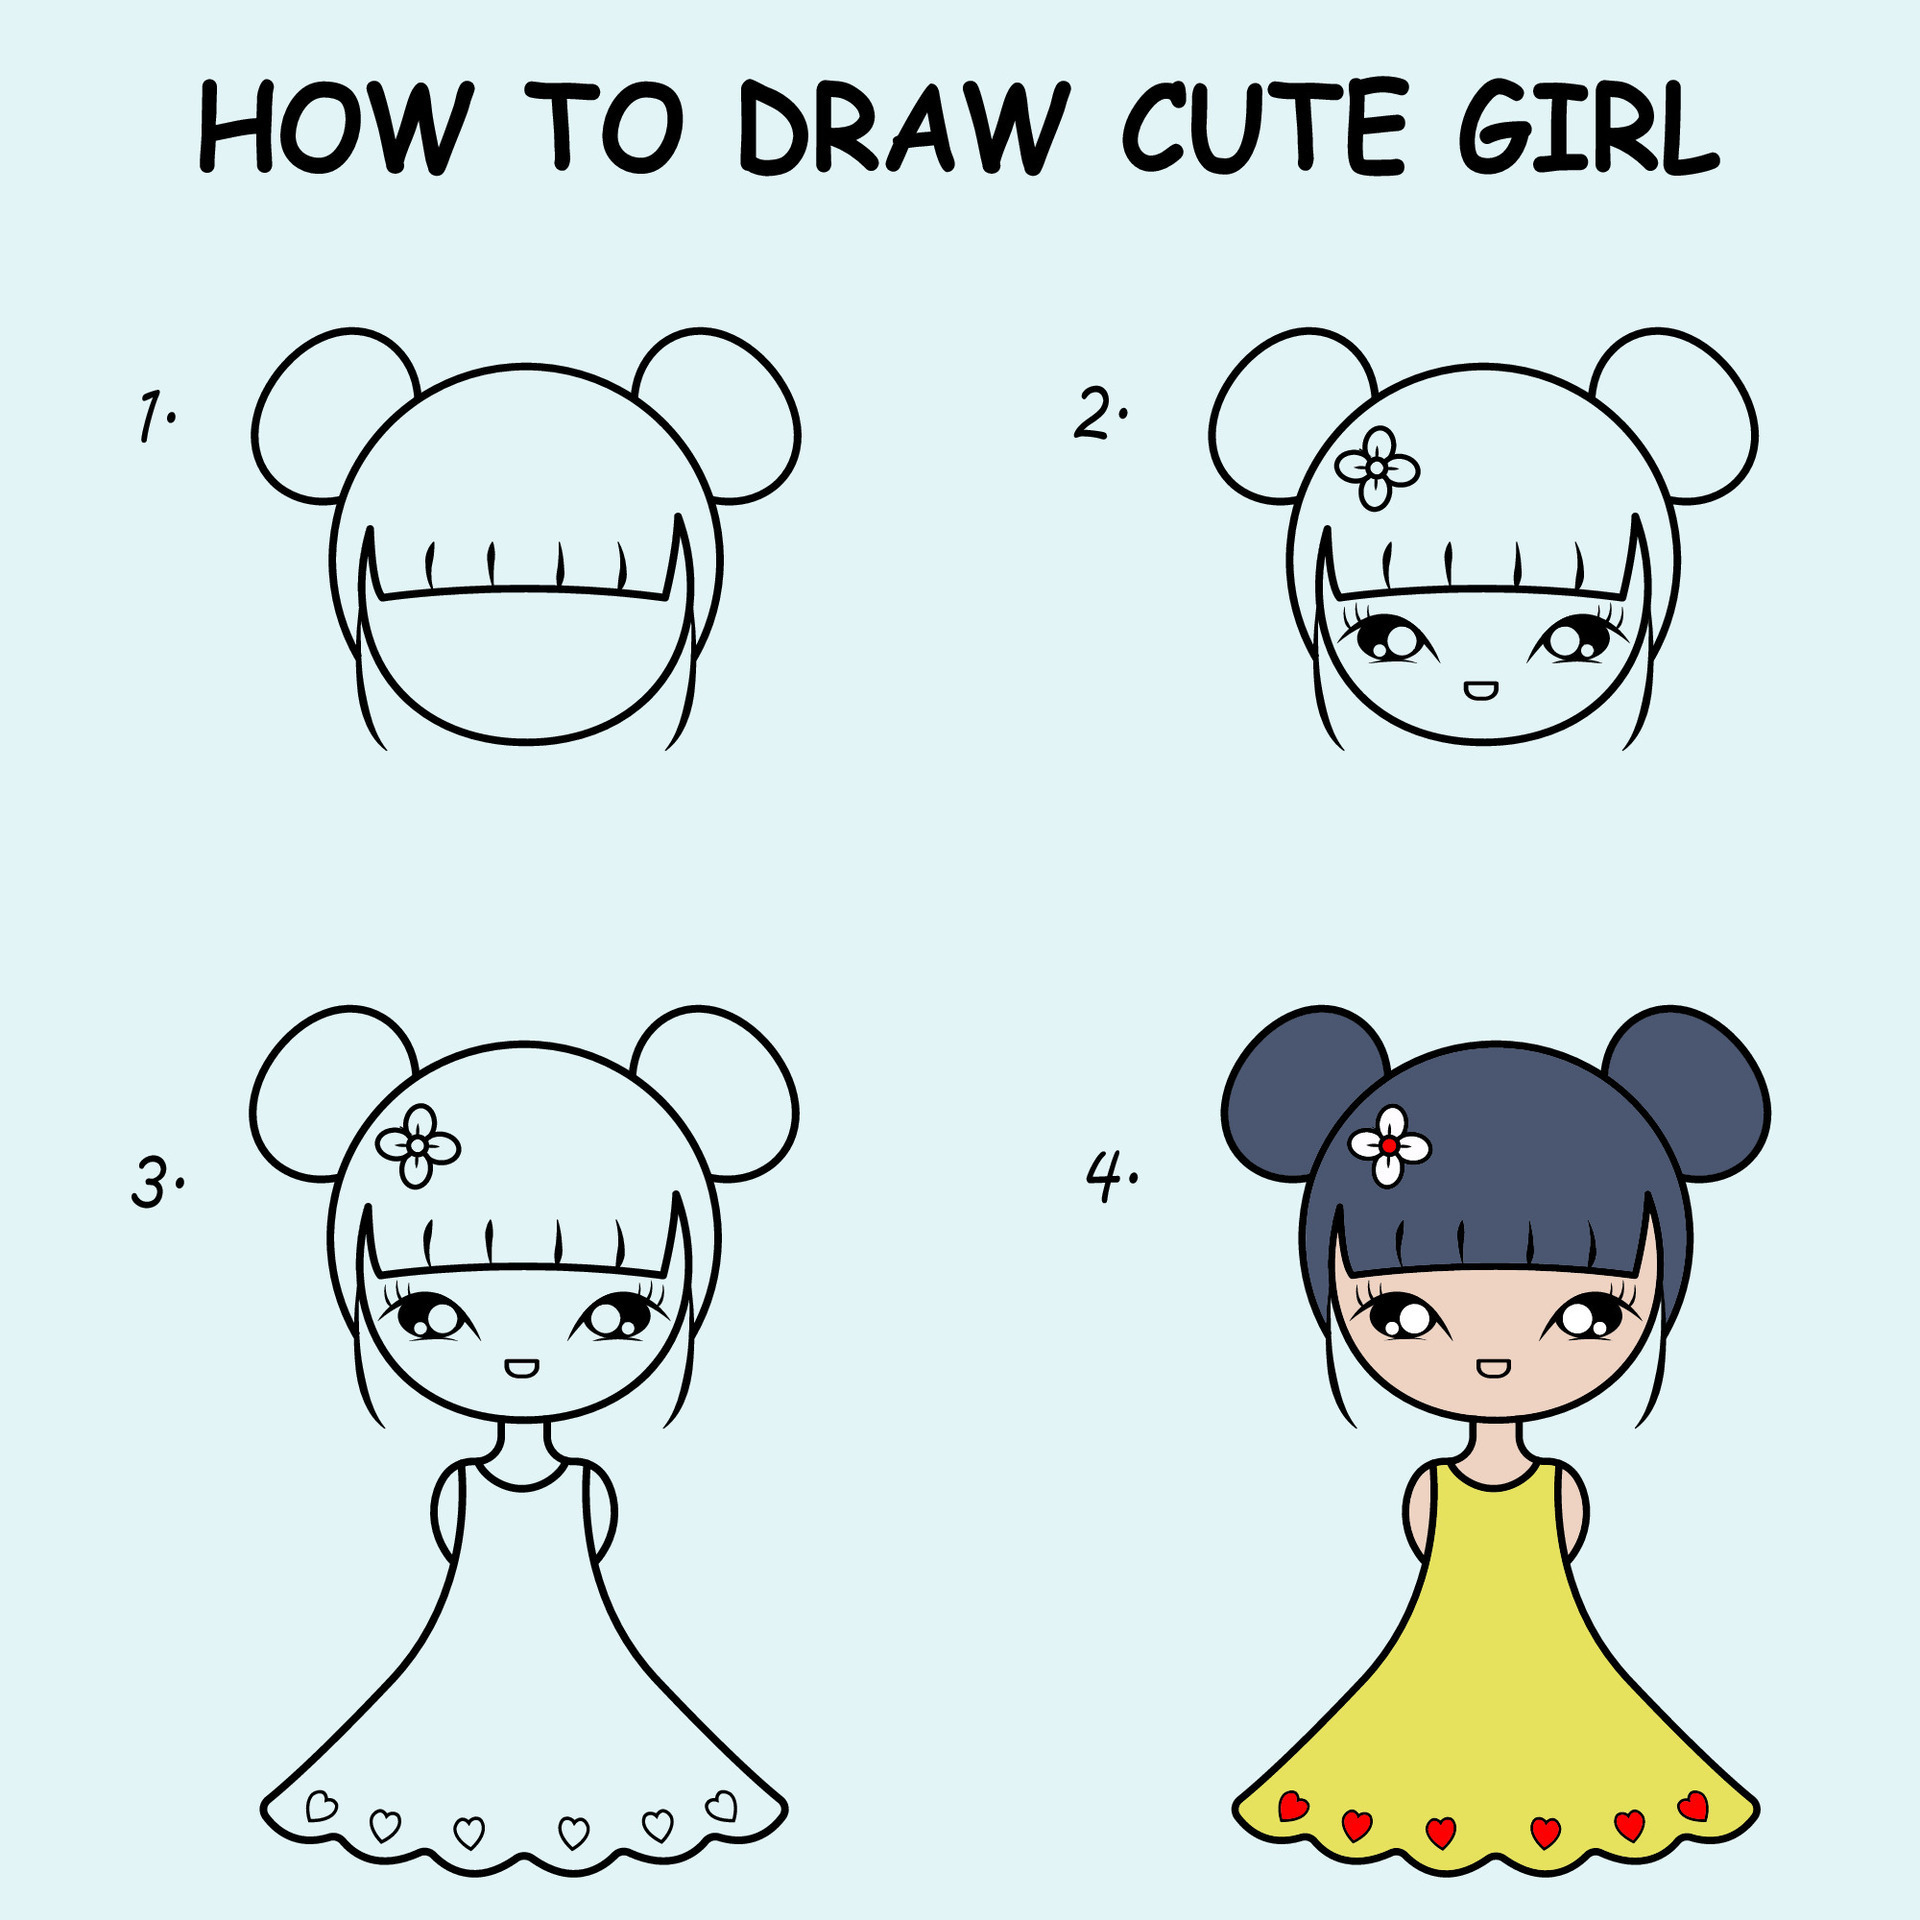 https://static.vecteezy.com/system/resources/previews/026/379/306/original/step-by-step-to-draw-a-cute-girl-drawing-tutorial-a-cute-girl-drawing-lesson-for-children-illustration-free-vector.jpg